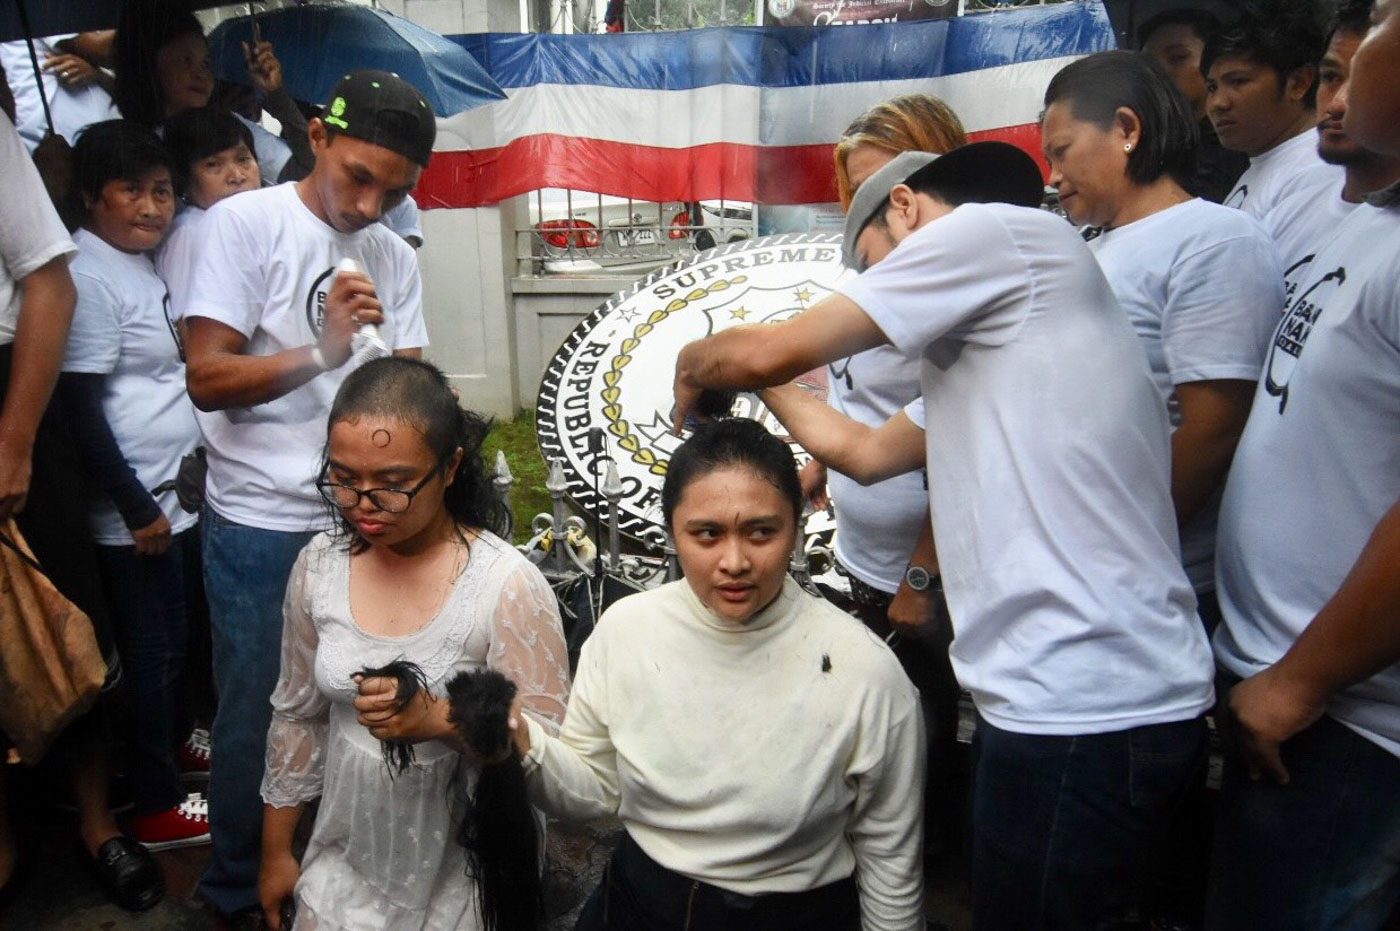 SYMBOLIC HAIRCUT. Members of Bantay Nakaw coalition troop to the Supreme Court amid the rain on June 11, 2018, to shave their heads in protest of the 50% shading threshold applied by the Presidential Electoral Tribunal. Photo by Angie de Silva/Rappler  